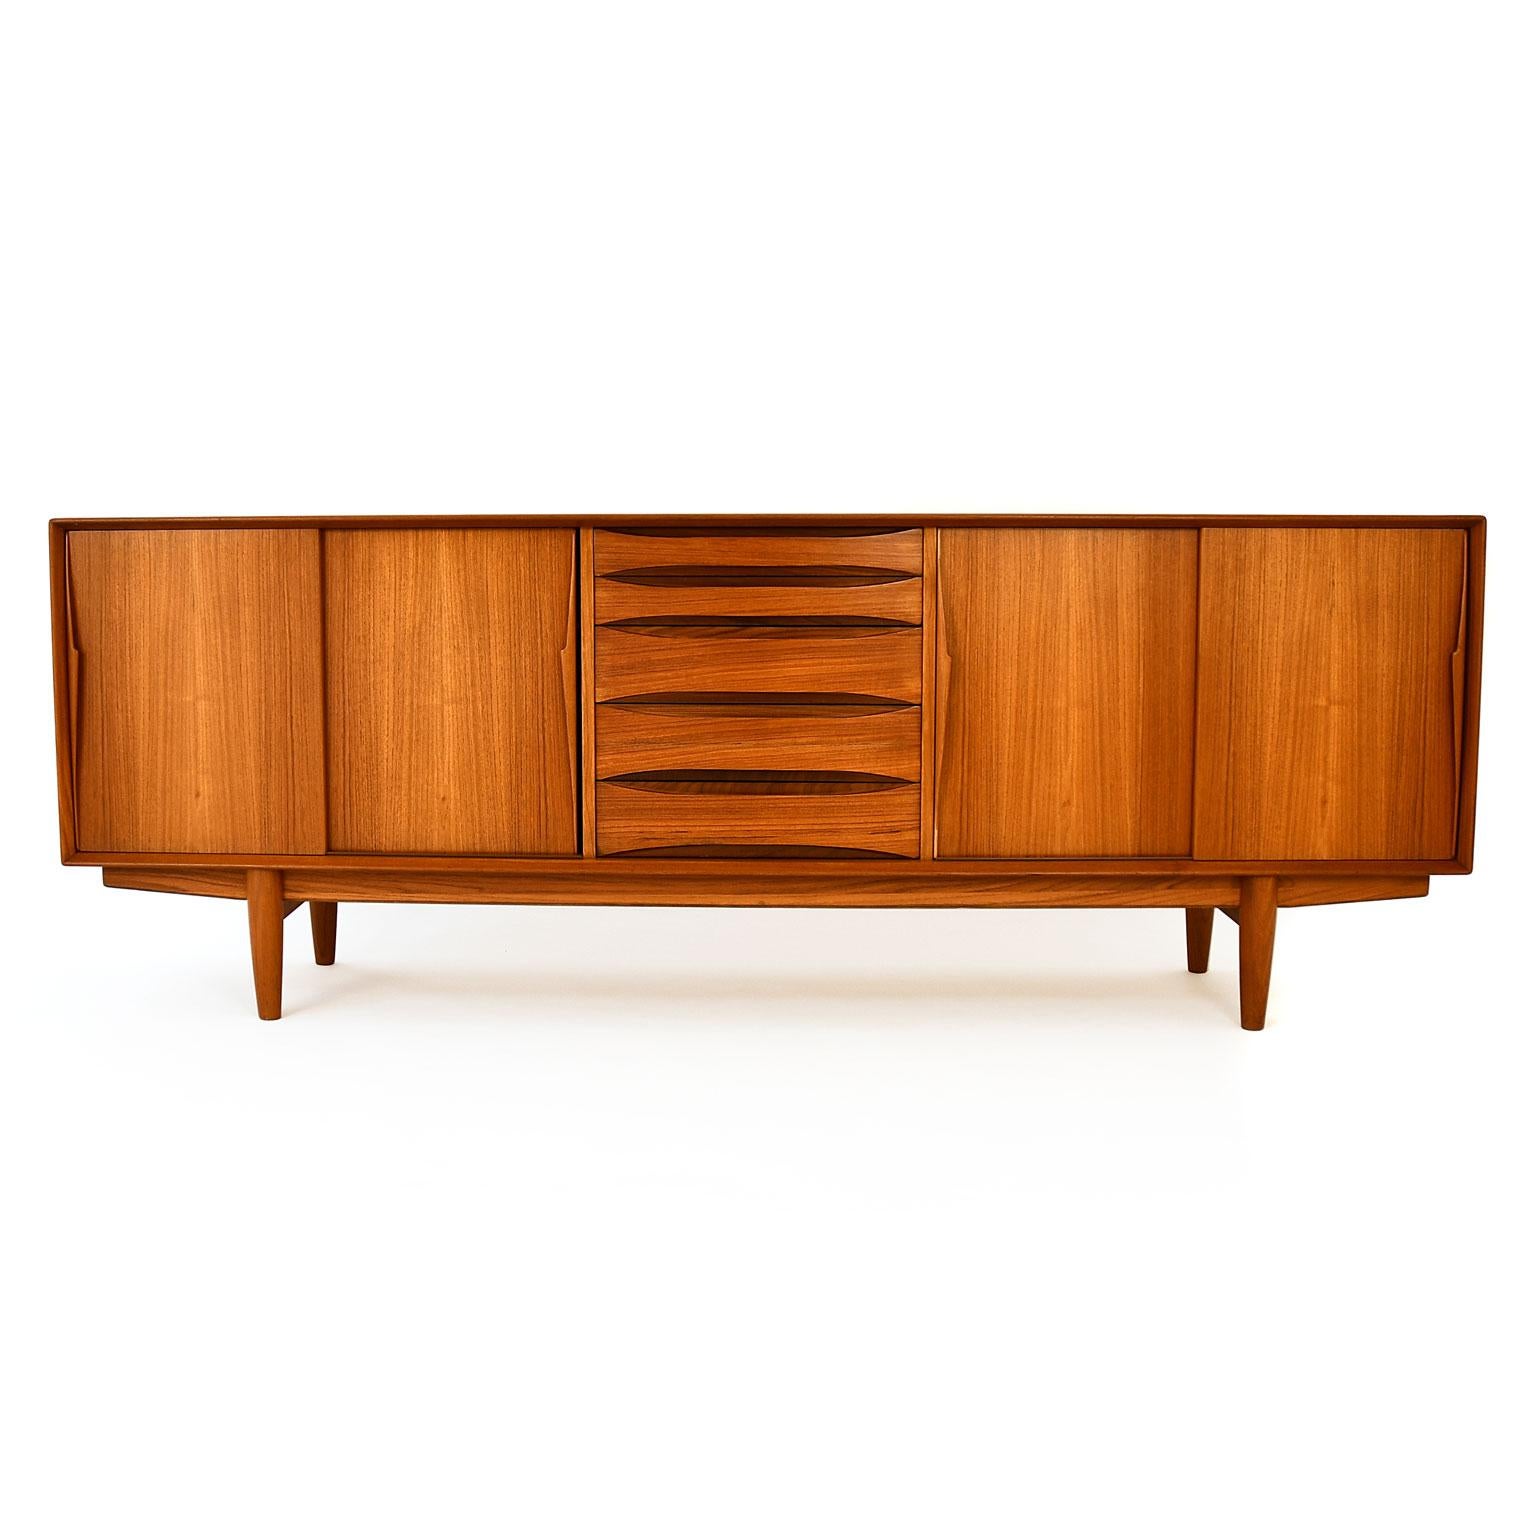 Danish low midcentury sideboard designed by Arne Vodder in the late 1950s. Dyrlund produced it in the 1960s. The frame is made of solid teak wood, and teak wood veneer. Two sliding doors on each side hiding shelves. 5 drawers, 2 smaller and 3 larger